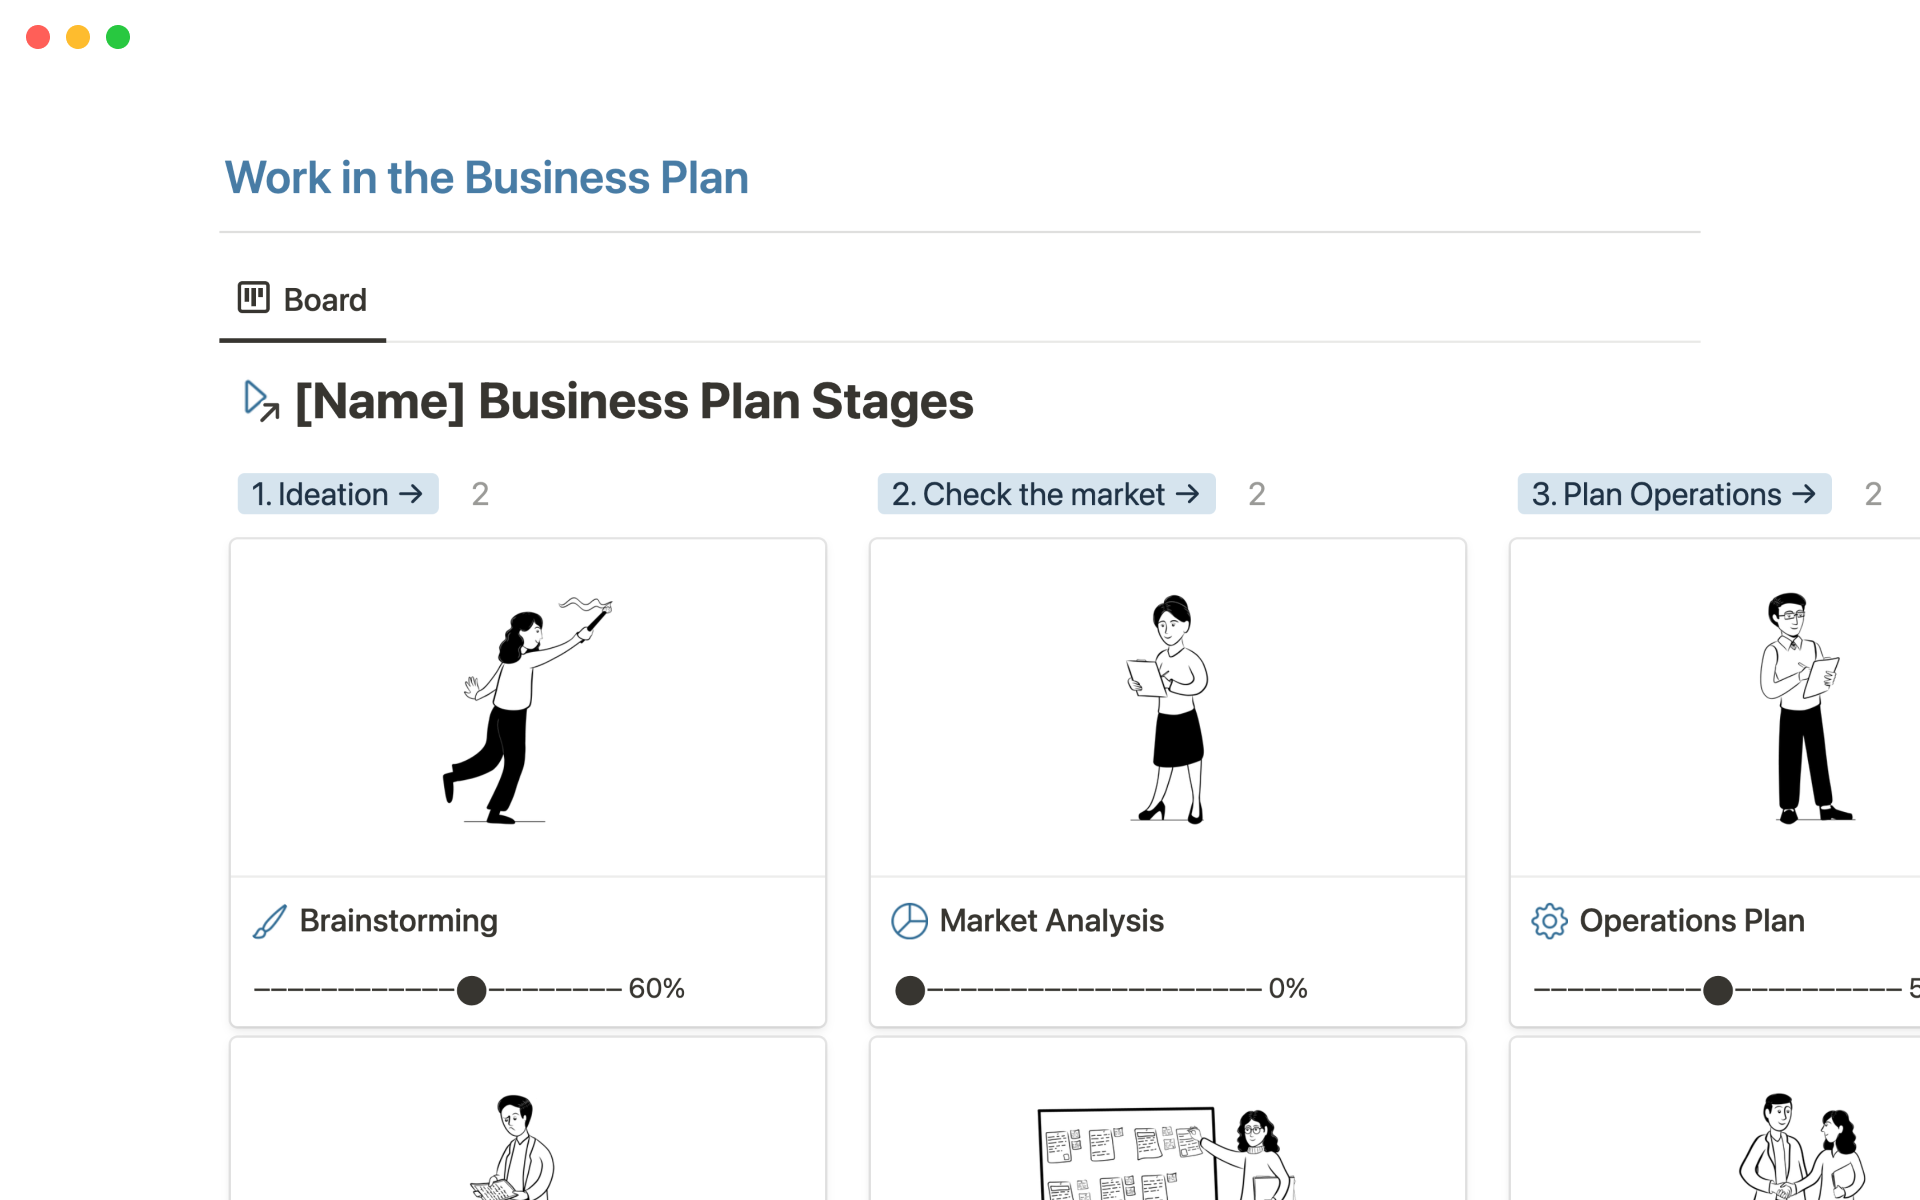 A tool to build interactive and shareable business plans.